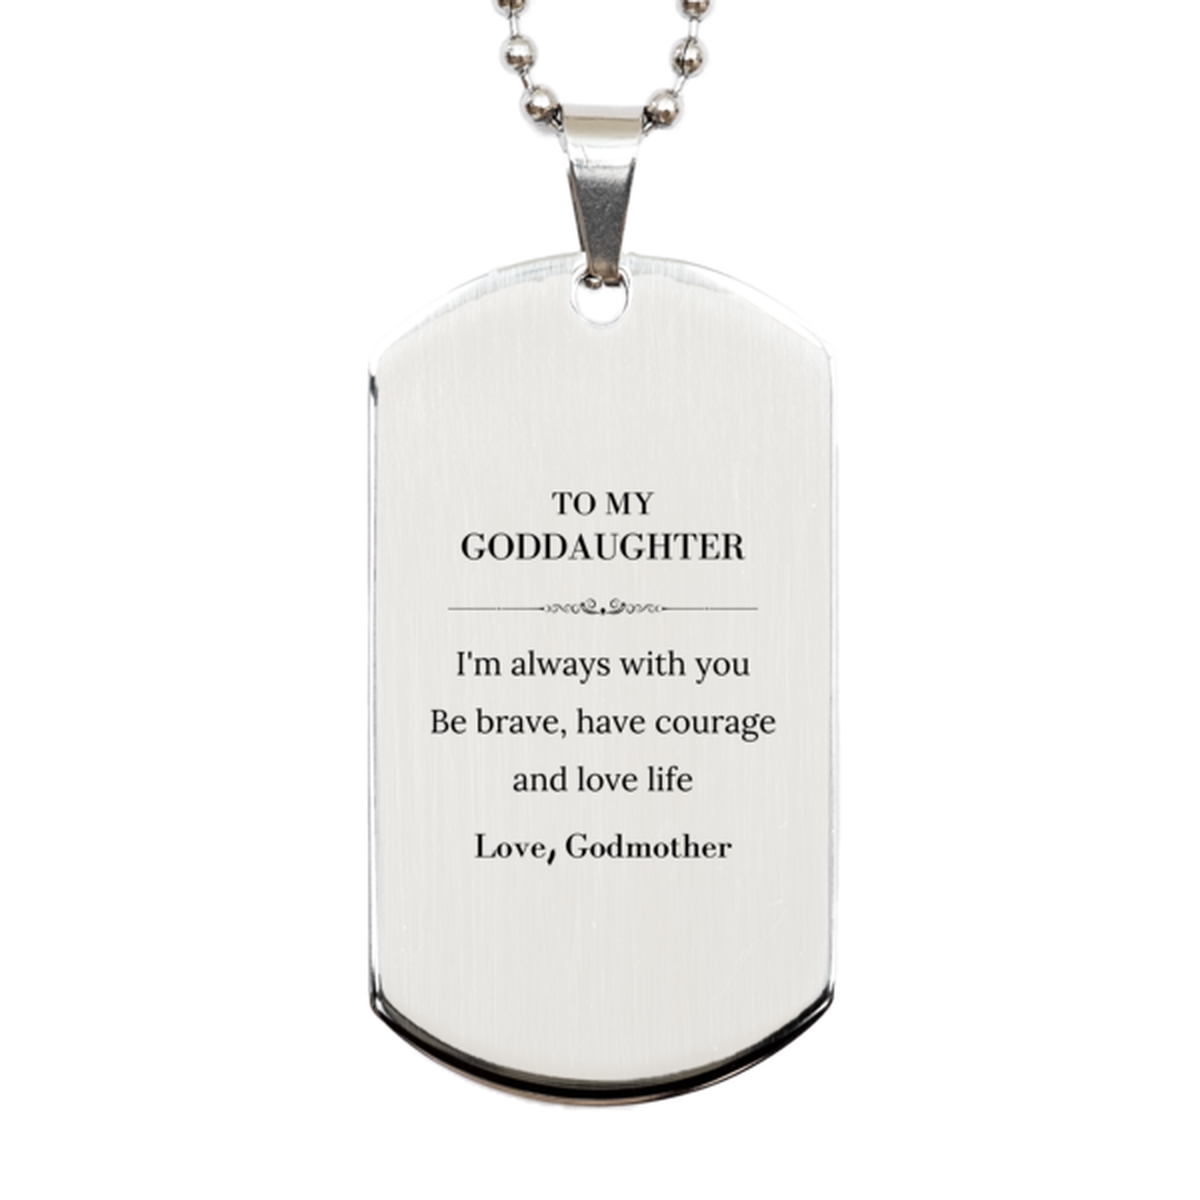 To My Goddaughter Gifts from Godmother, Unique Silver Dog Tag Inspirational Christmas Birthday Graduation Gifts for Goddaughter I'm always with you. Be brave, have courage and love life. Love, Godmother